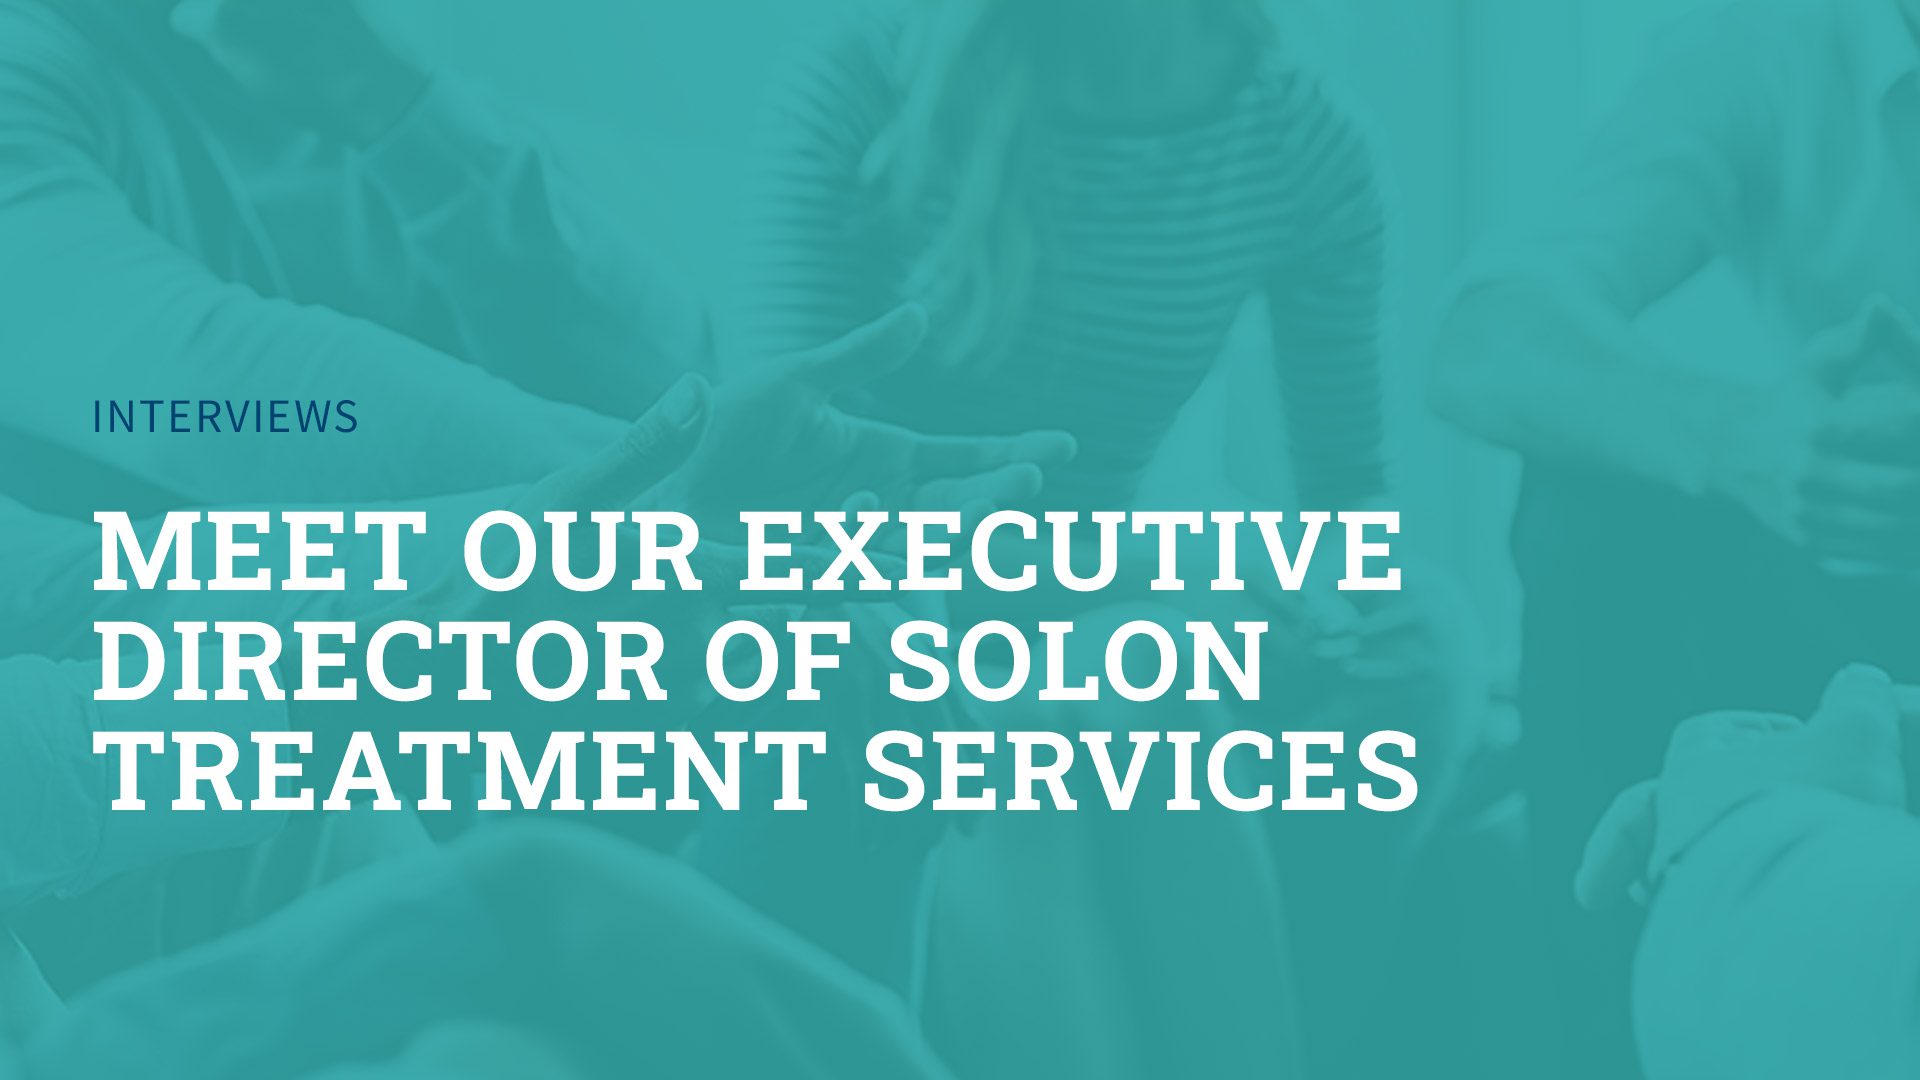 Meet our Executive Director of Solon Treatment Services